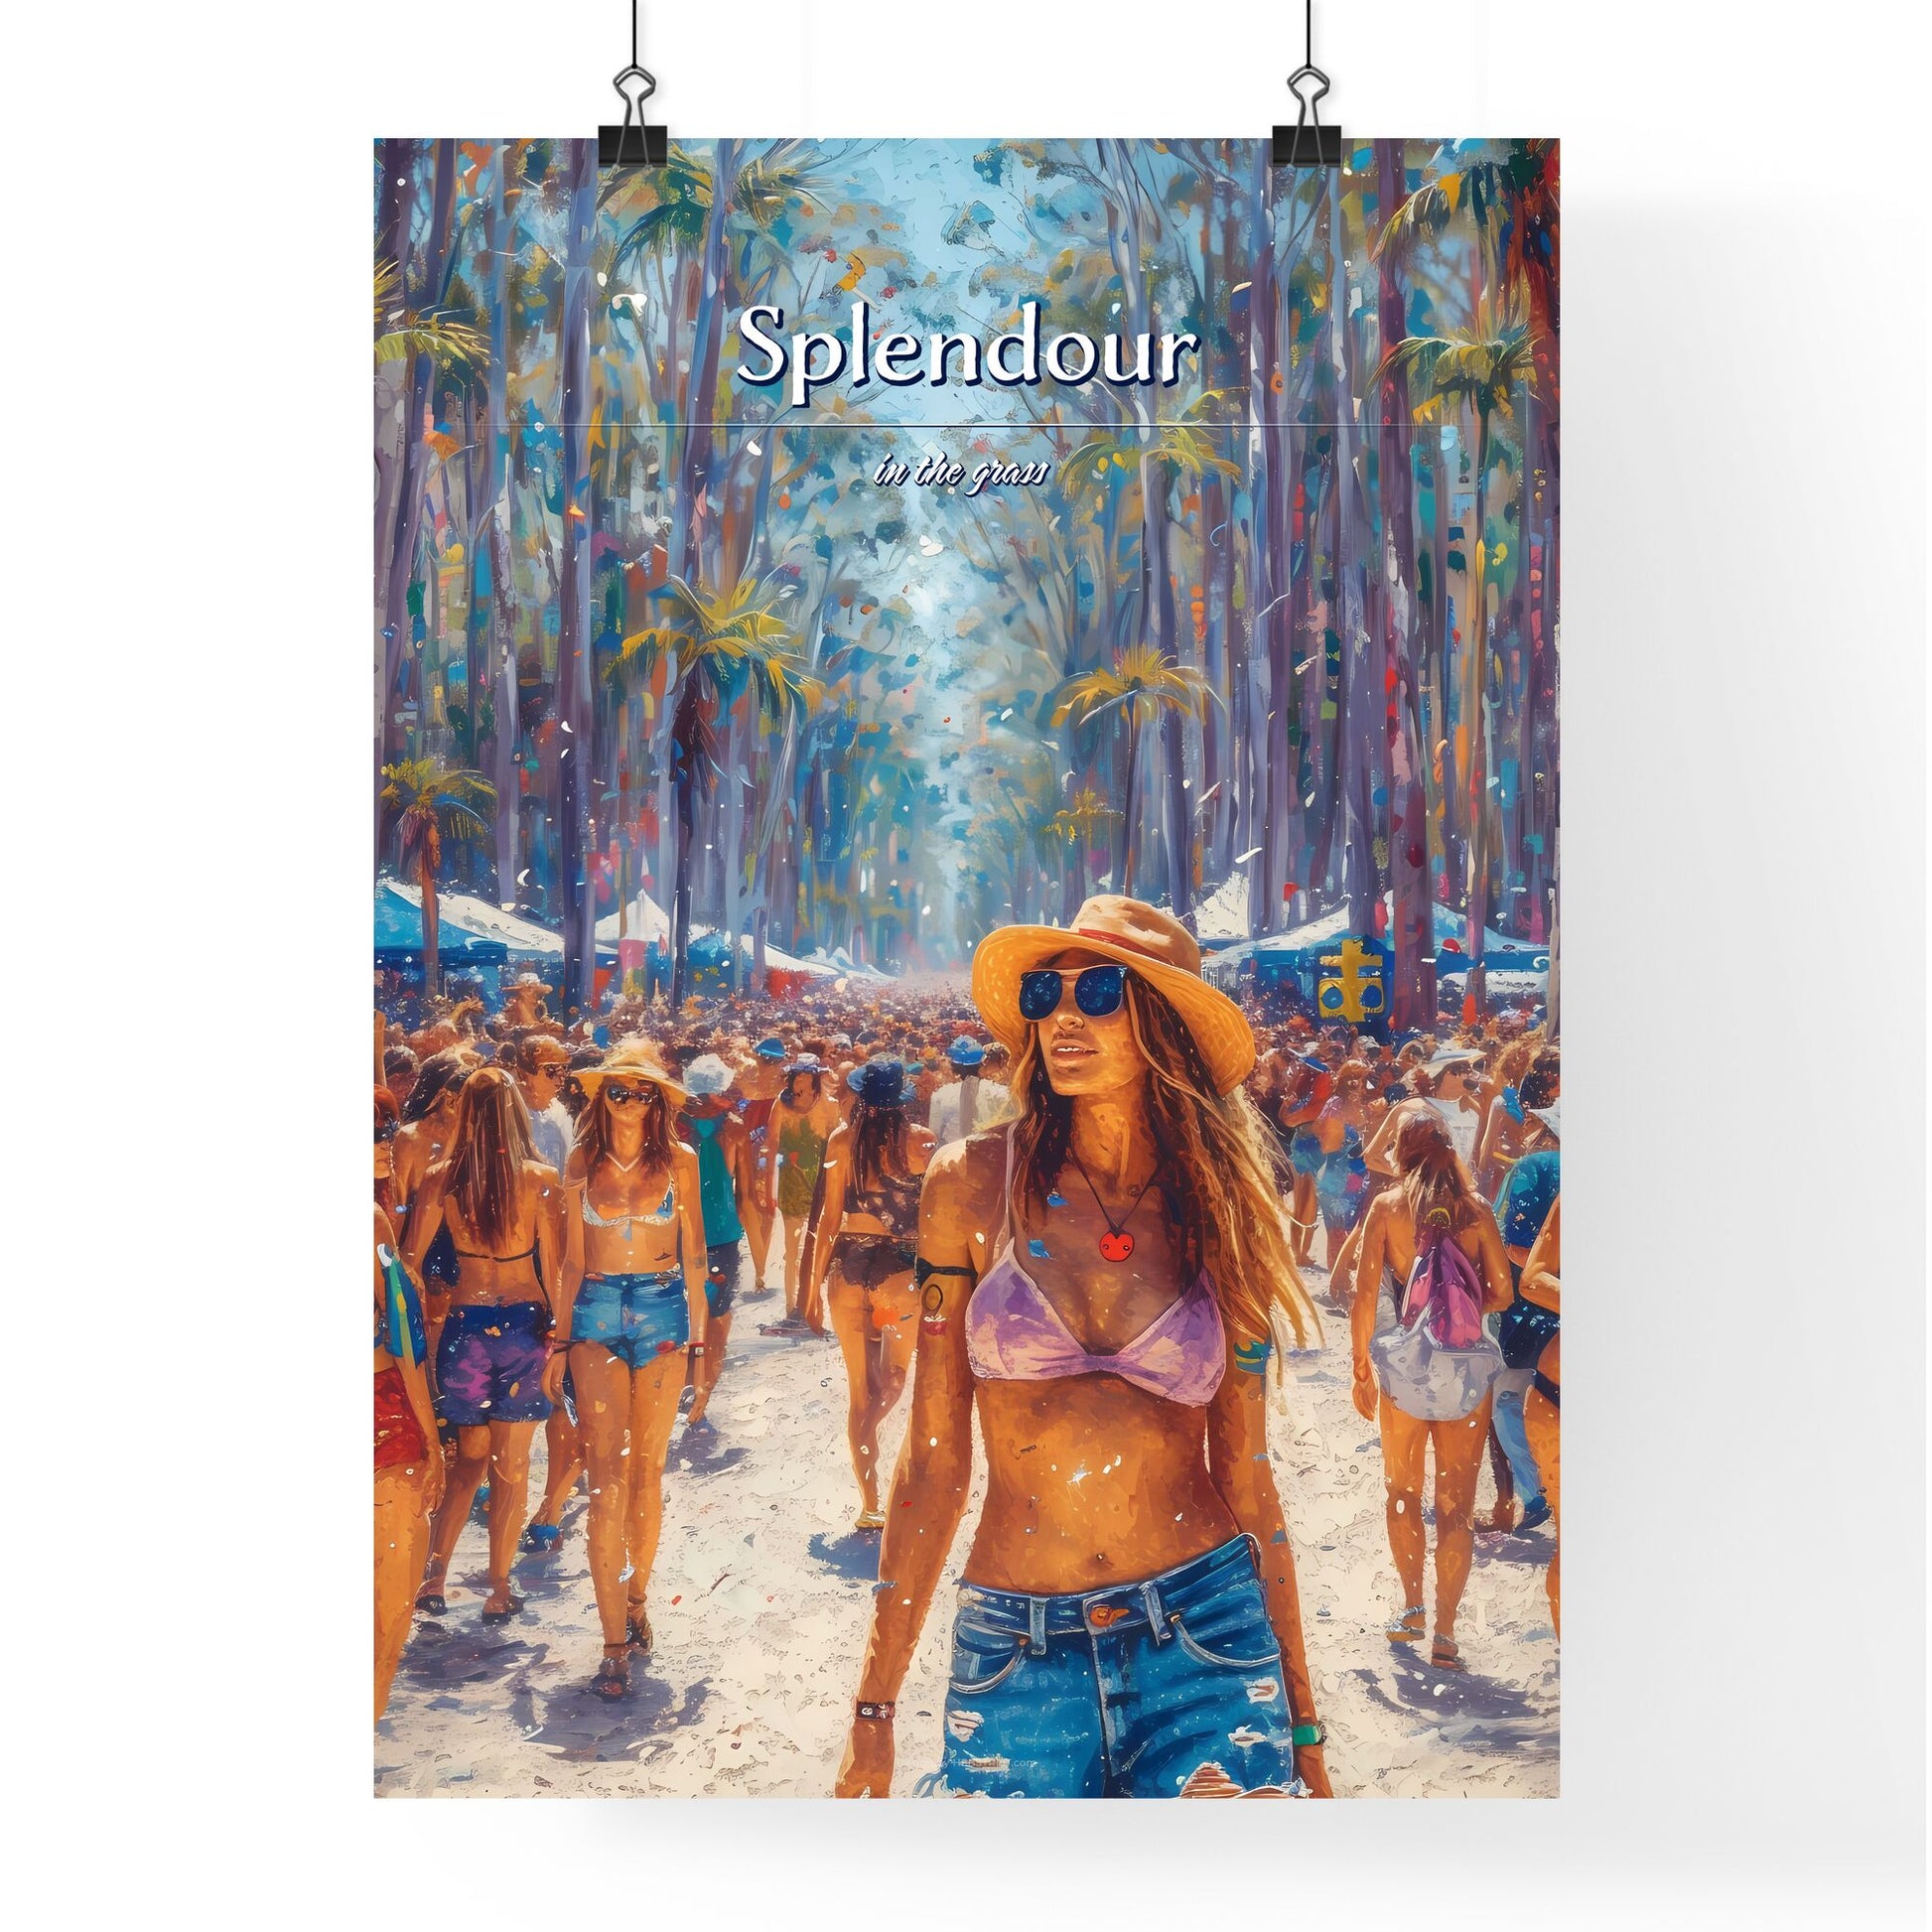 Splendour in the Grass - Art print of a group of people walking in a forest Default Title